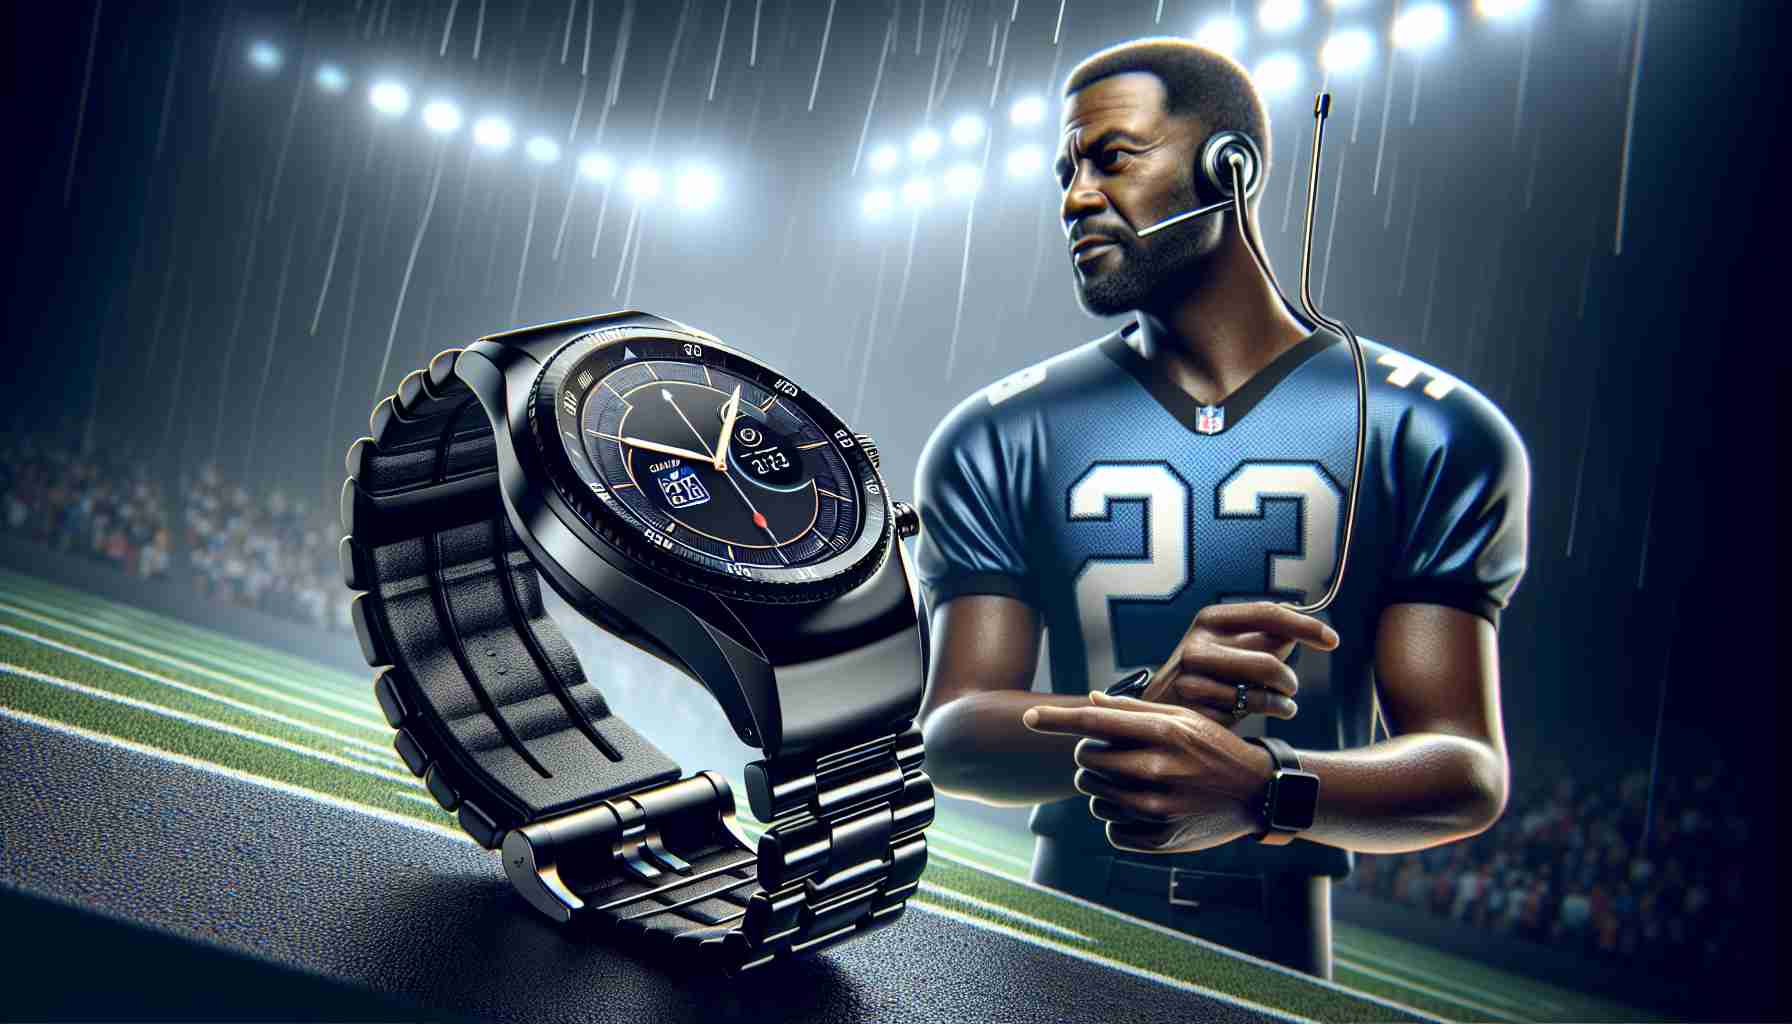 Boost Mobile Unveils the Coach Prime Moto Watch in Collaboration with NFL Legend